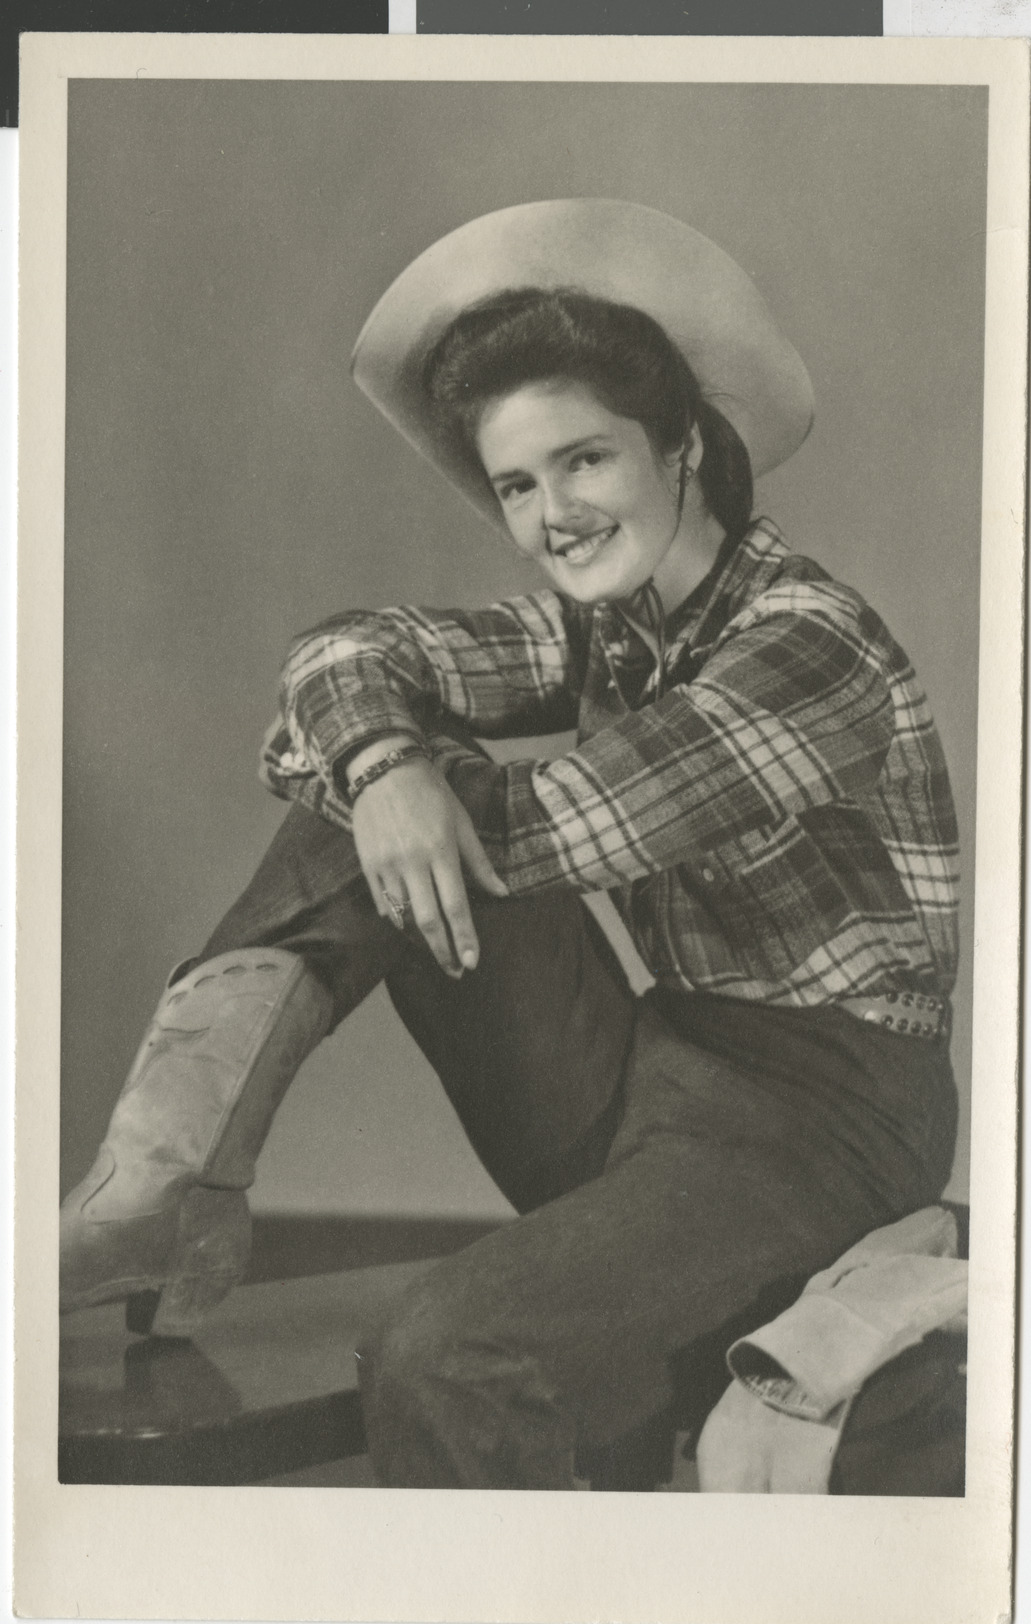 Postcard with photograph of Bella Stern in western wear, circa 1950